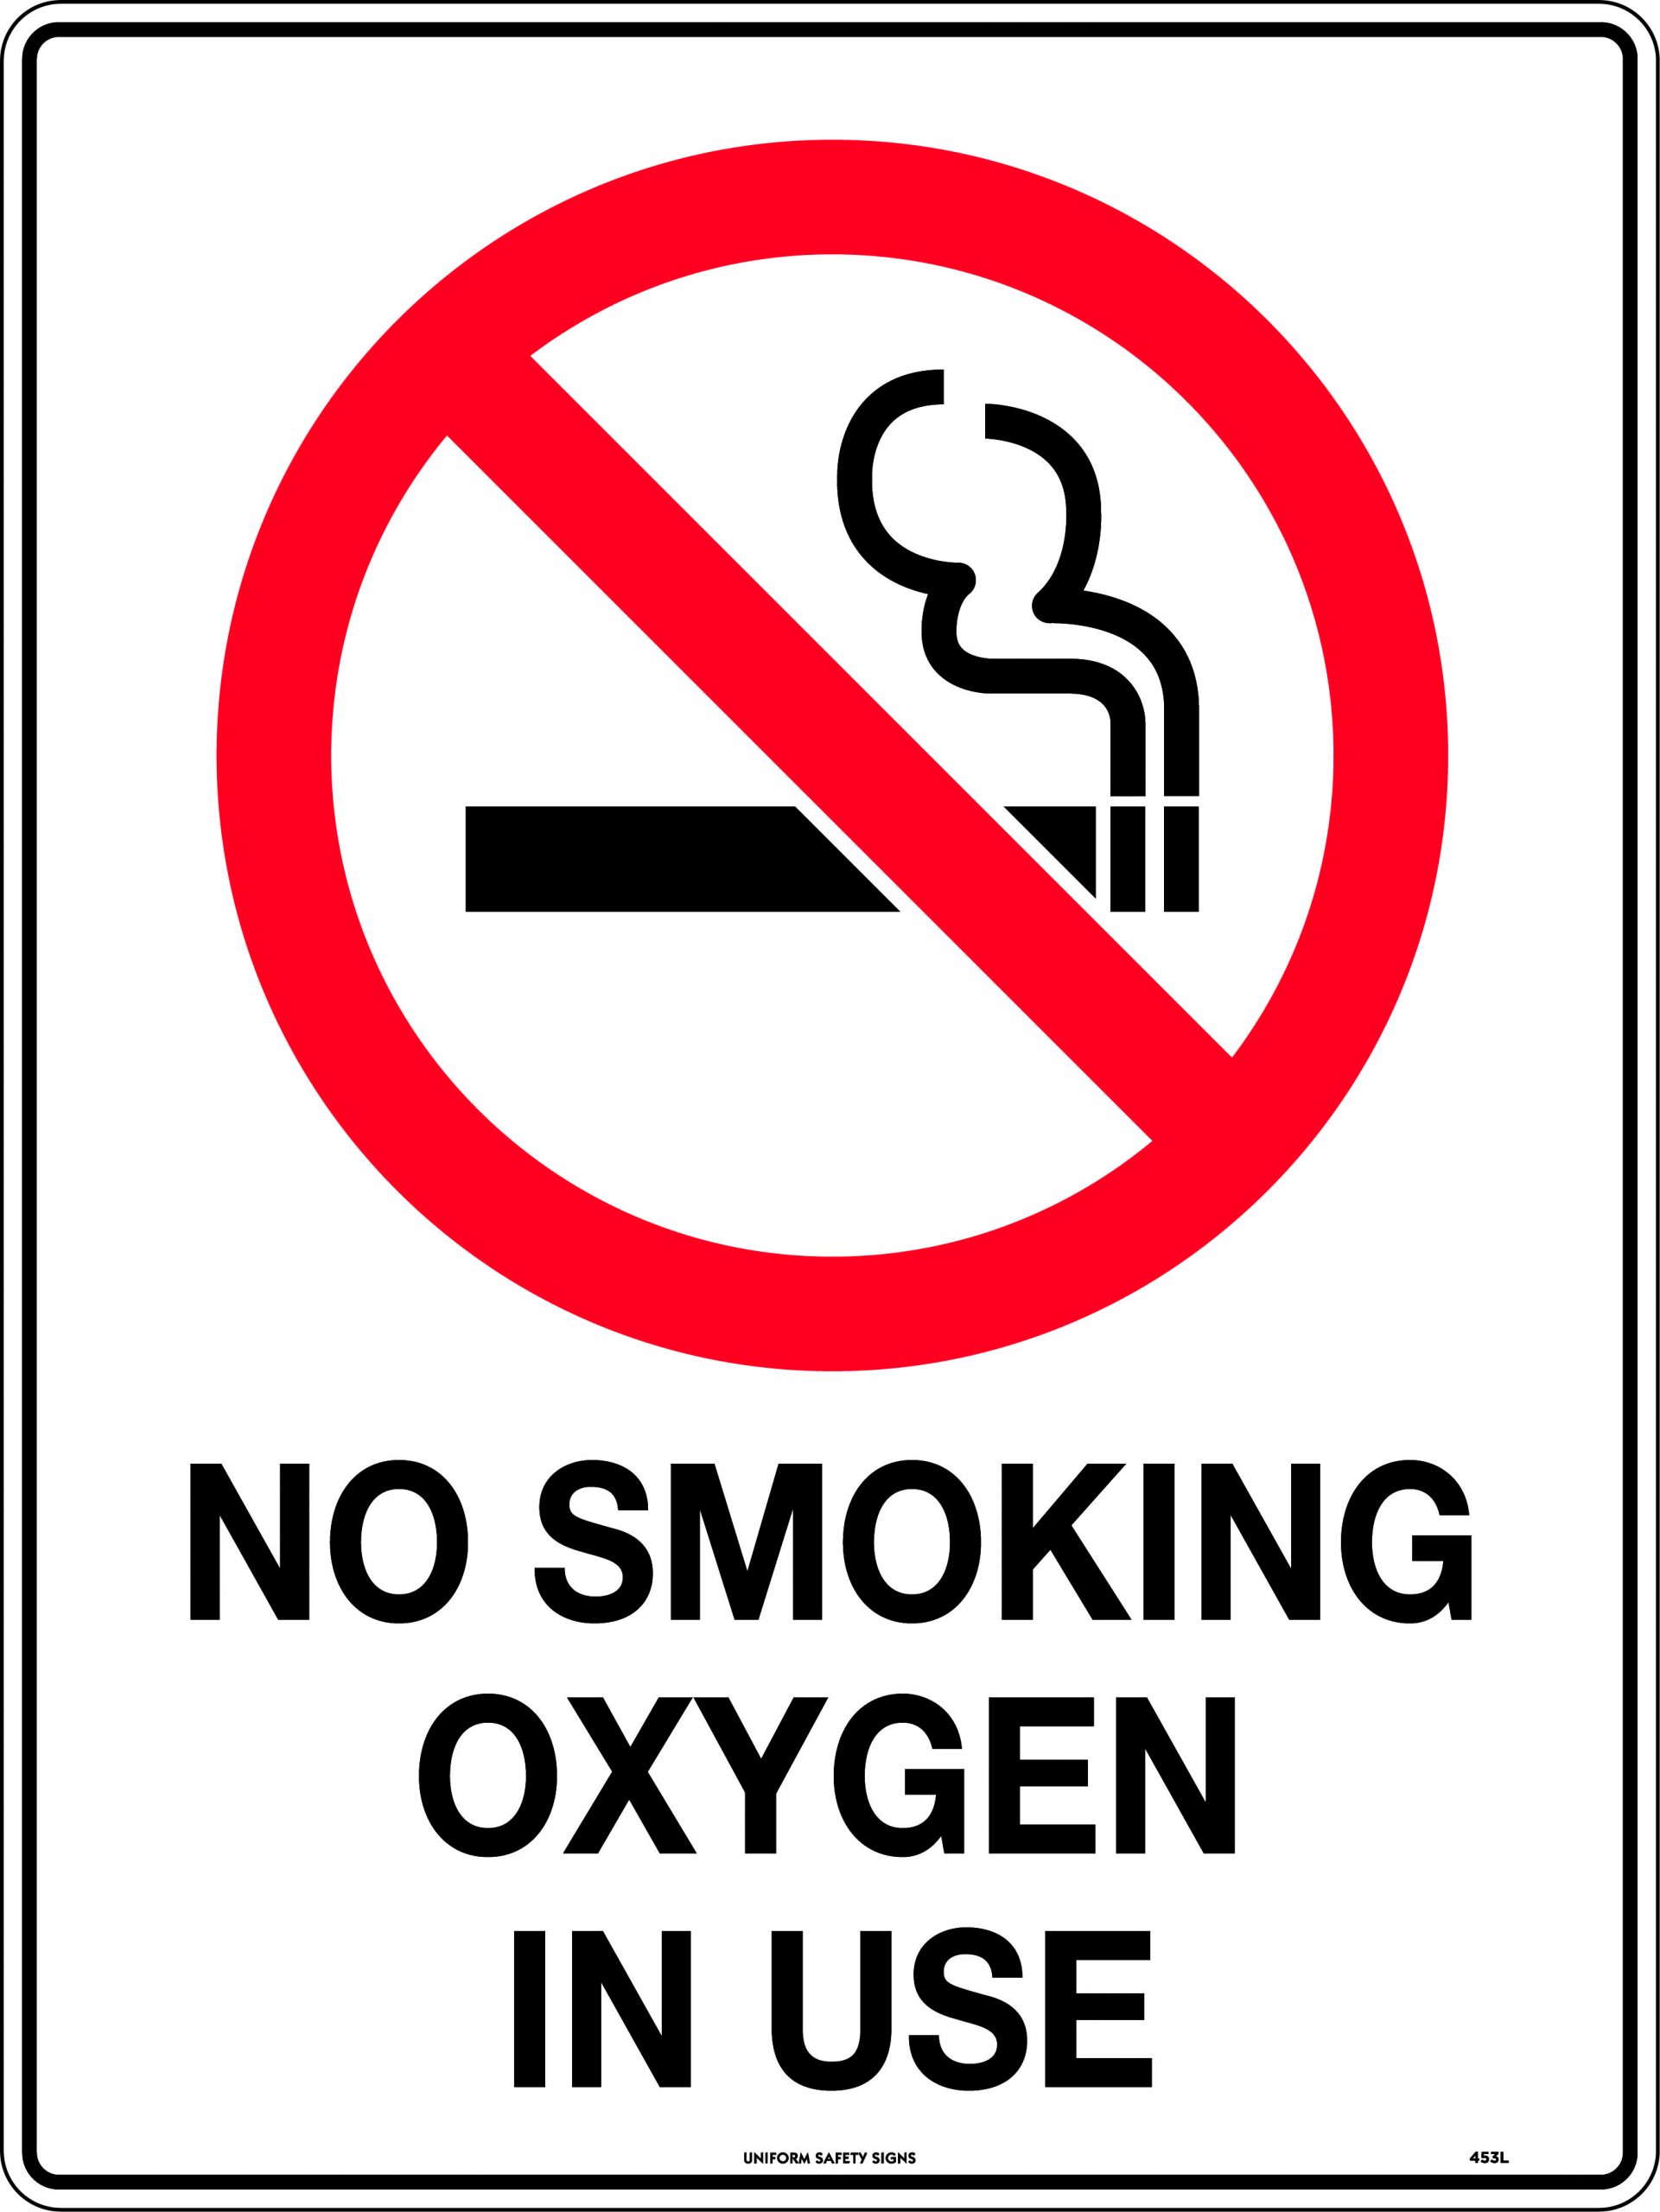 No Smoking Oxygen in Use Uniform Safety Signs